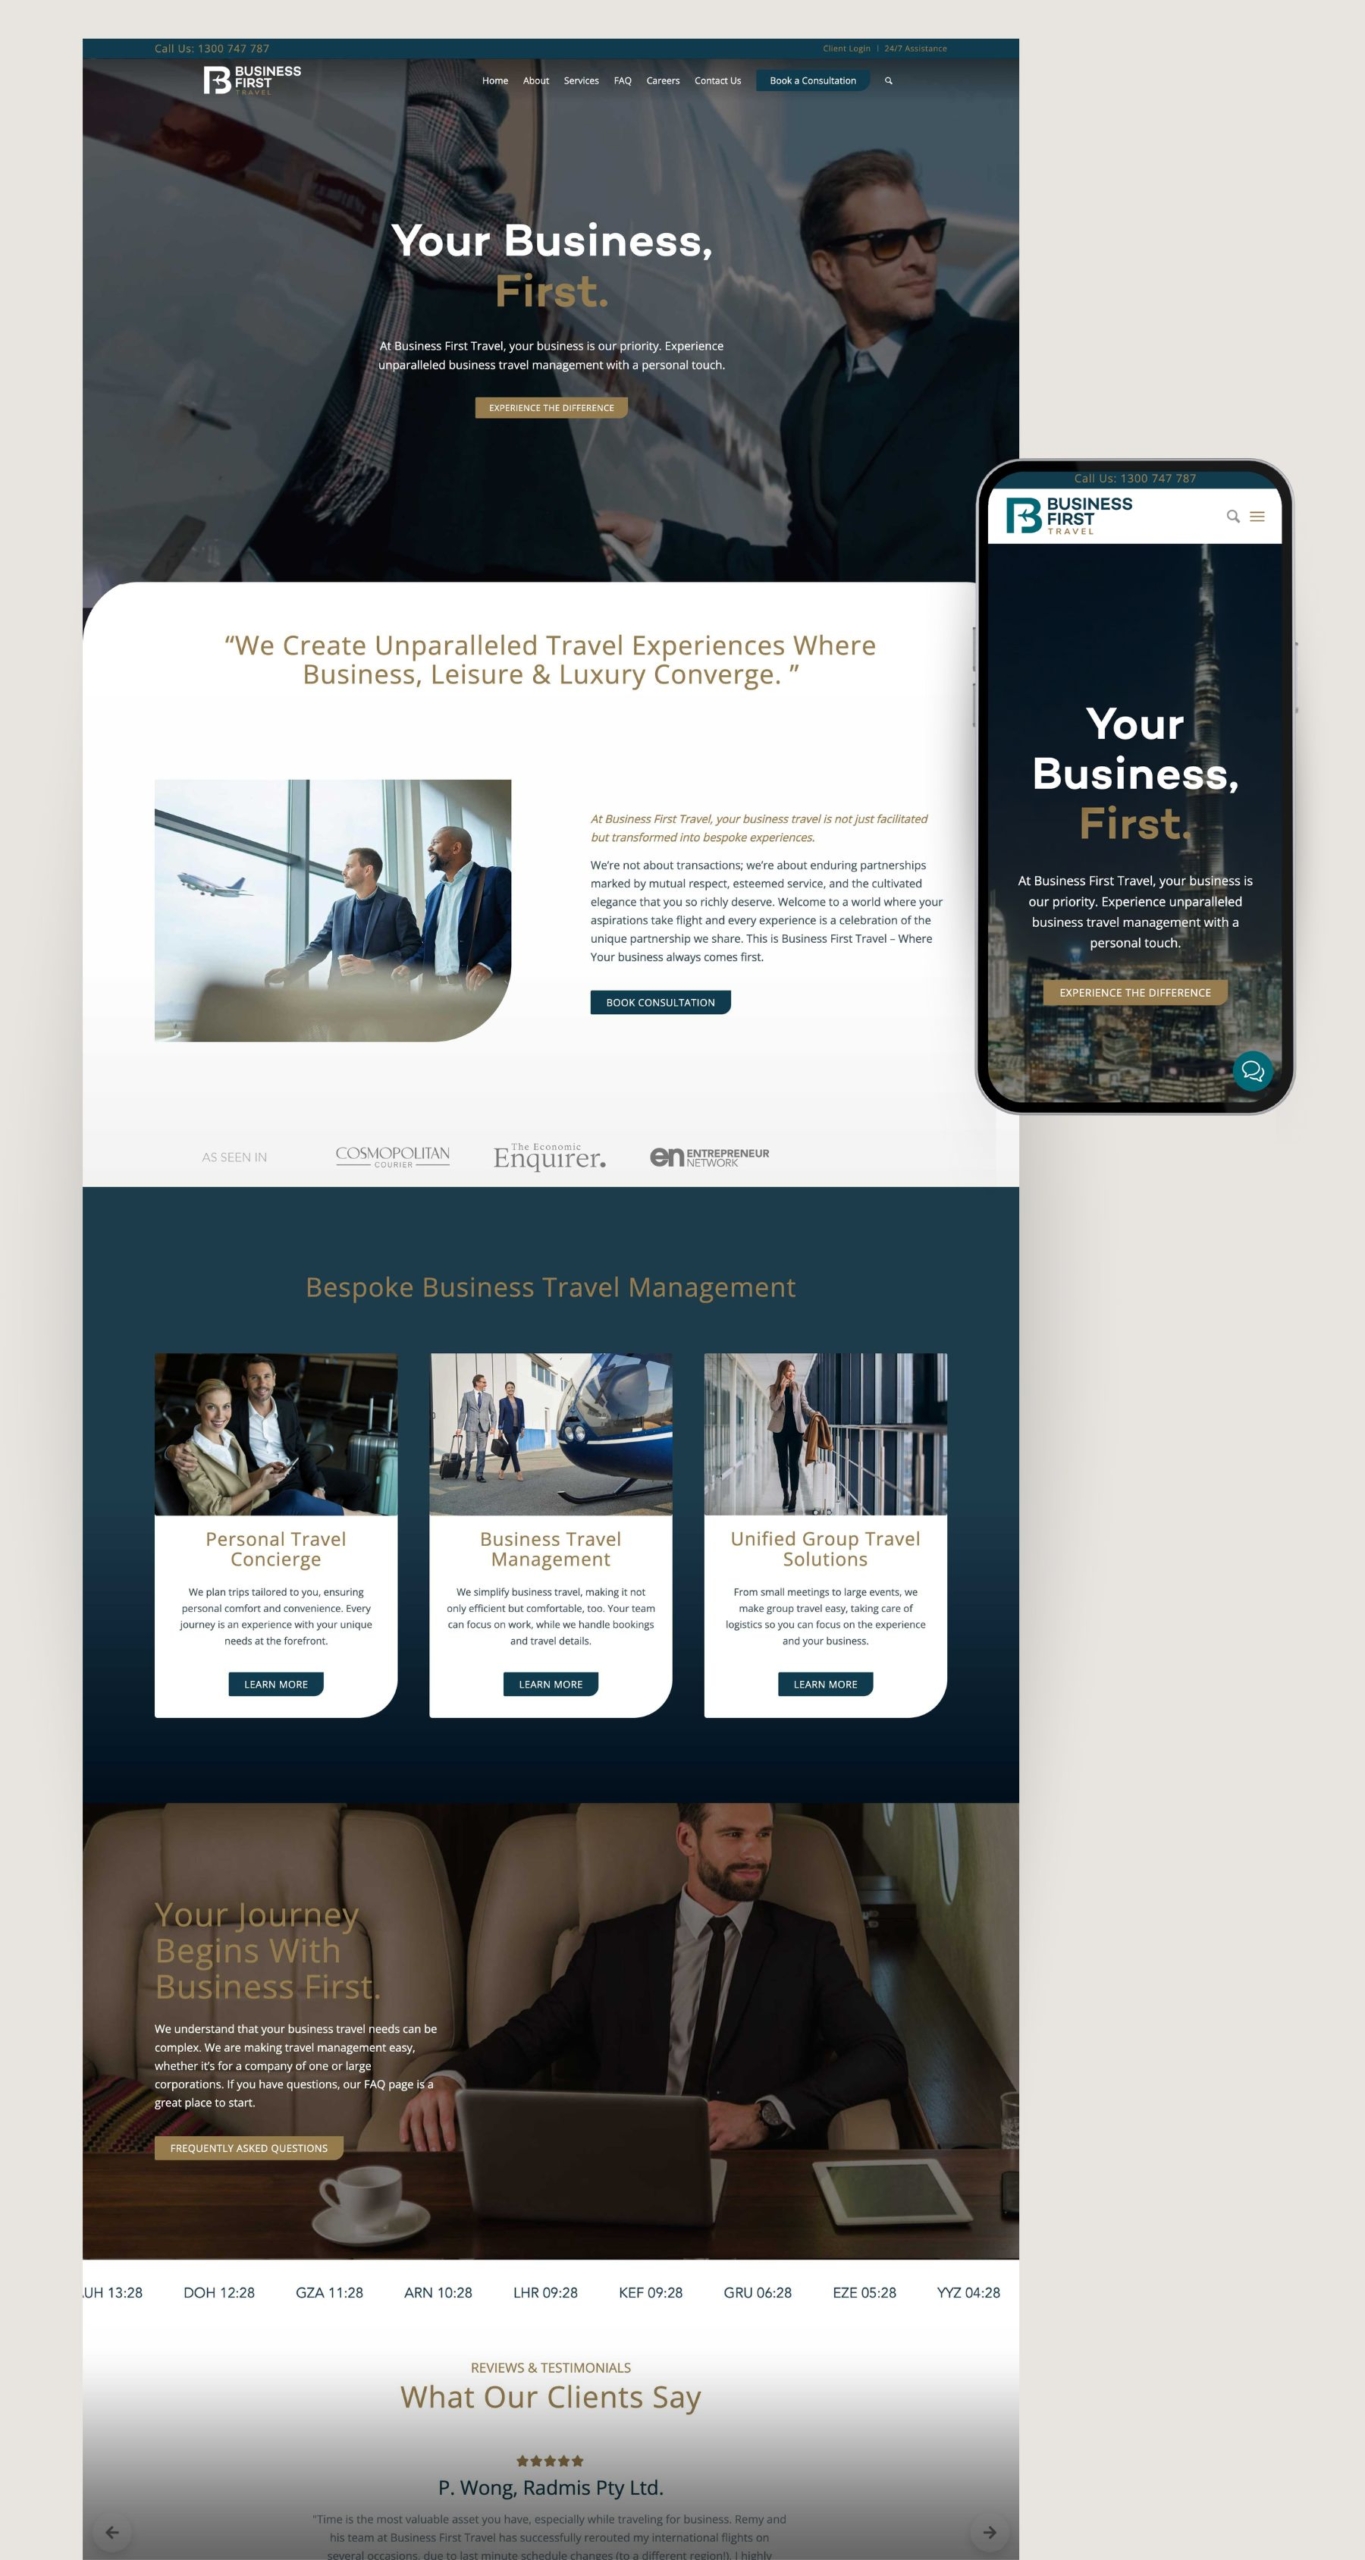 Business First Travel - Web Design for Boutique Travel Agency Brisbane by Done Digital